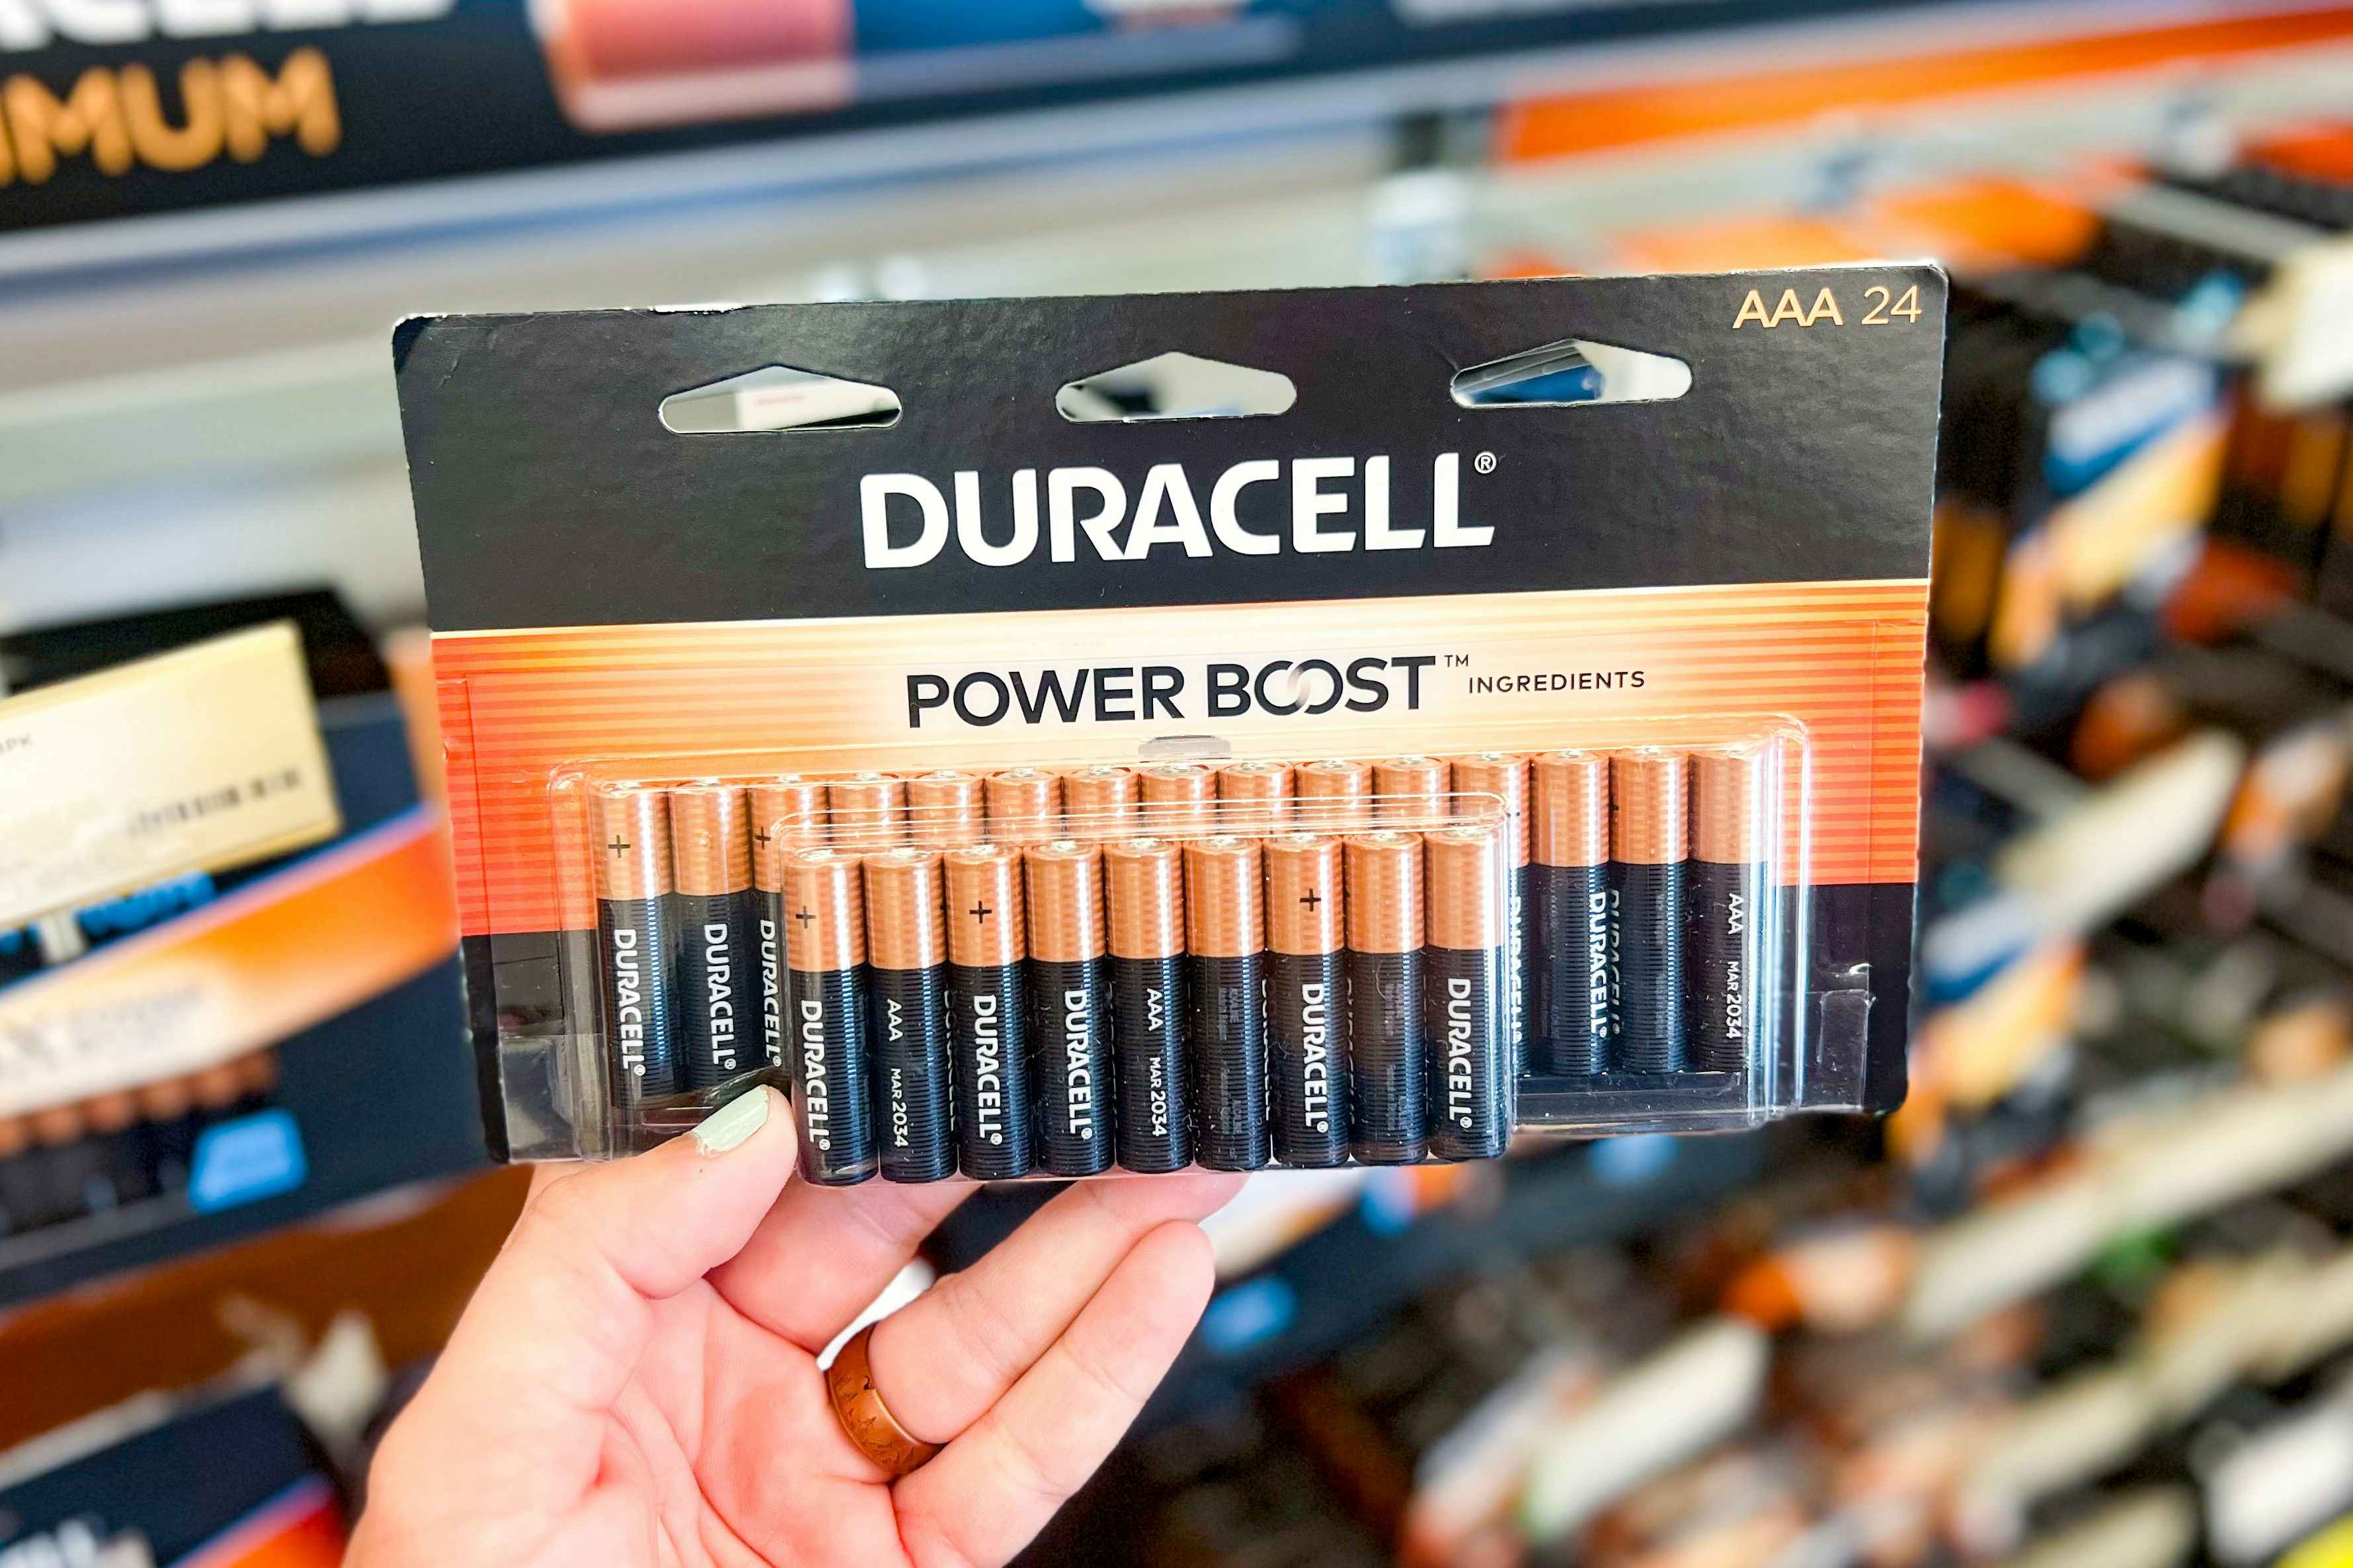 Free Duracell Batteries This Week at Office Depot